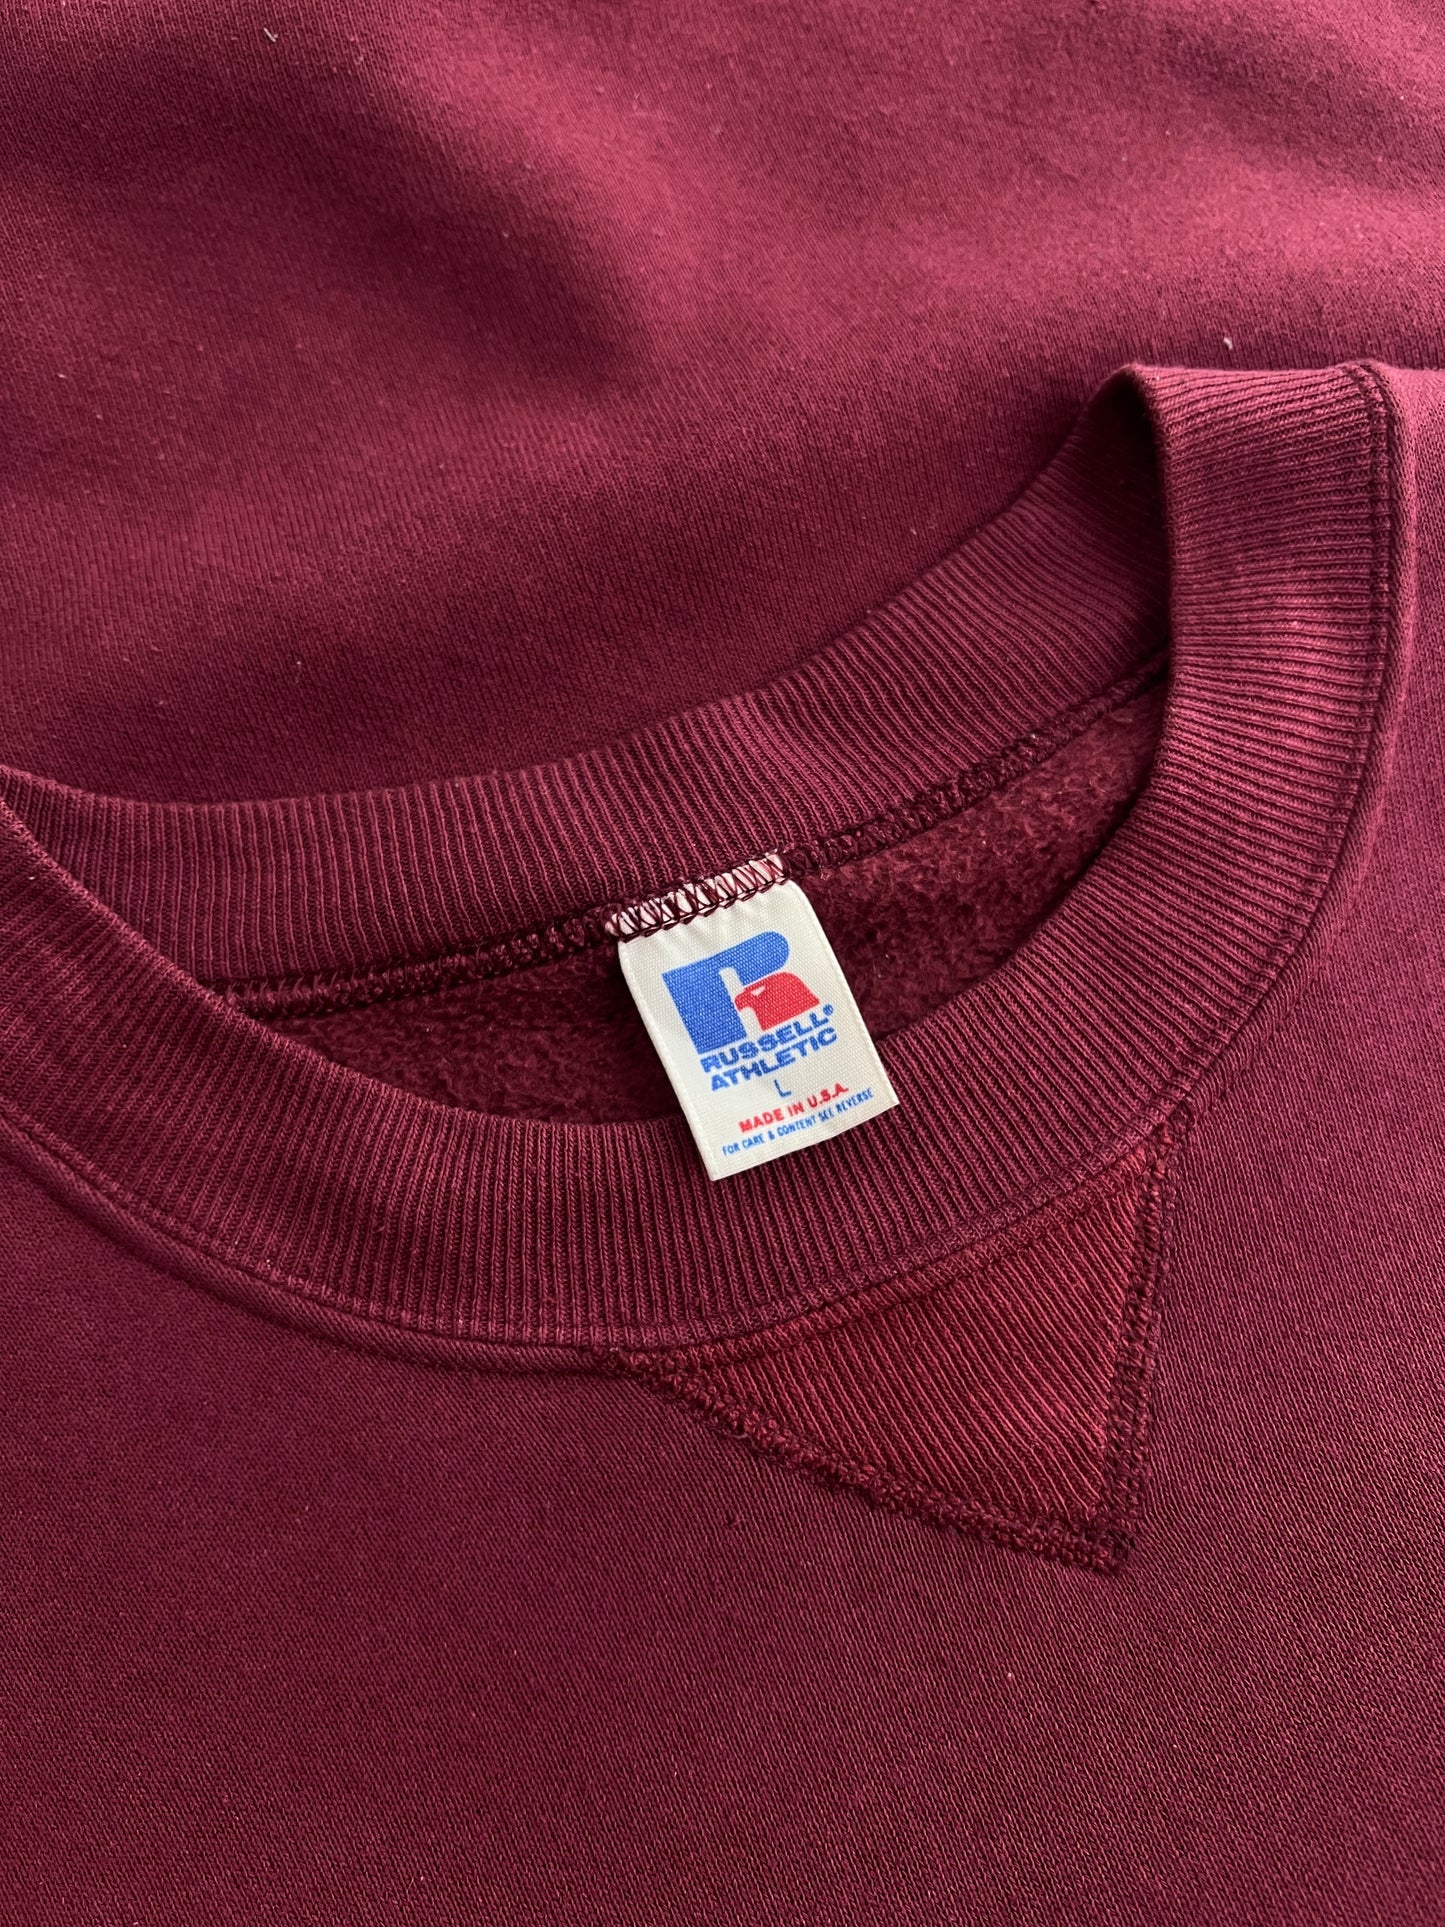 Made in USA Russel Athletic Sweatshirt [L]